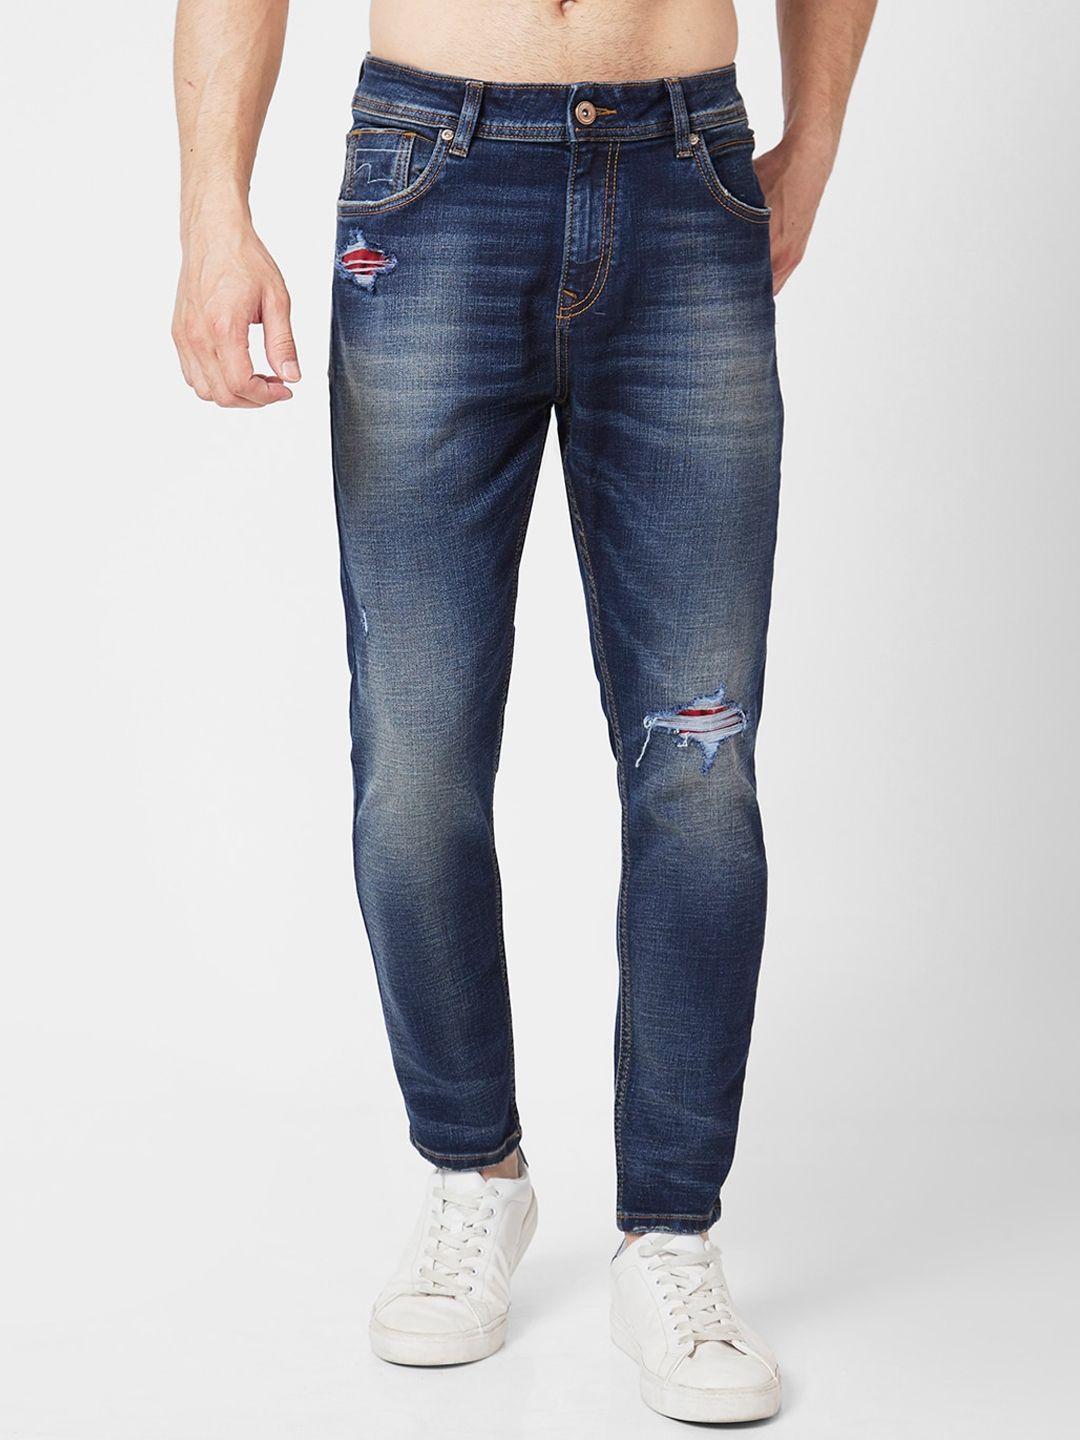 spykar-men-kano-skinny-fit-mildly-distressed-heavy-fade-stretchable-jeans